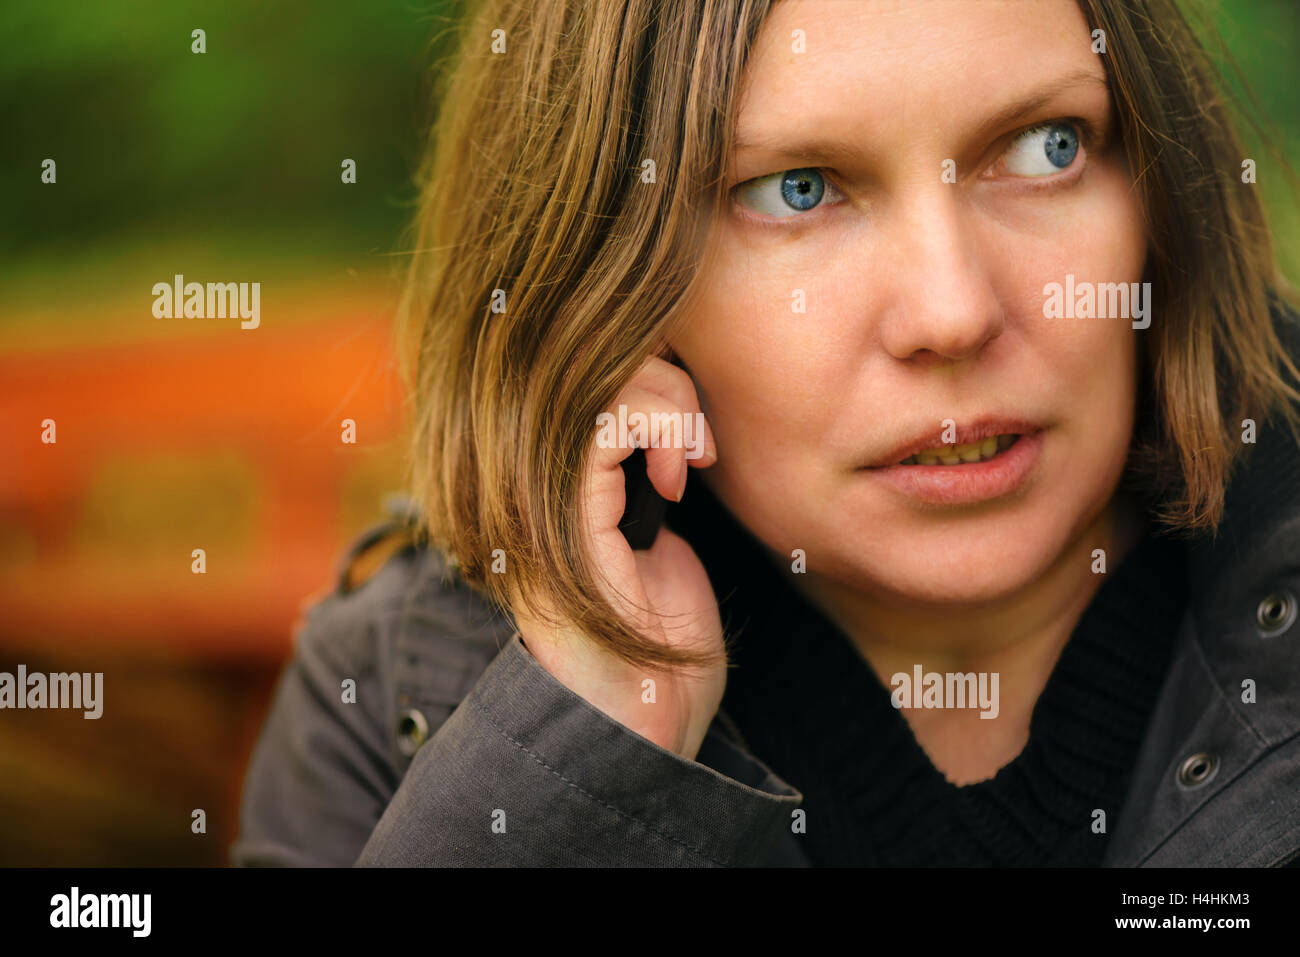 Woman with serious expression talking on mobile phone in park, dramatic light coming through treetops and falling on her face Stock Photo